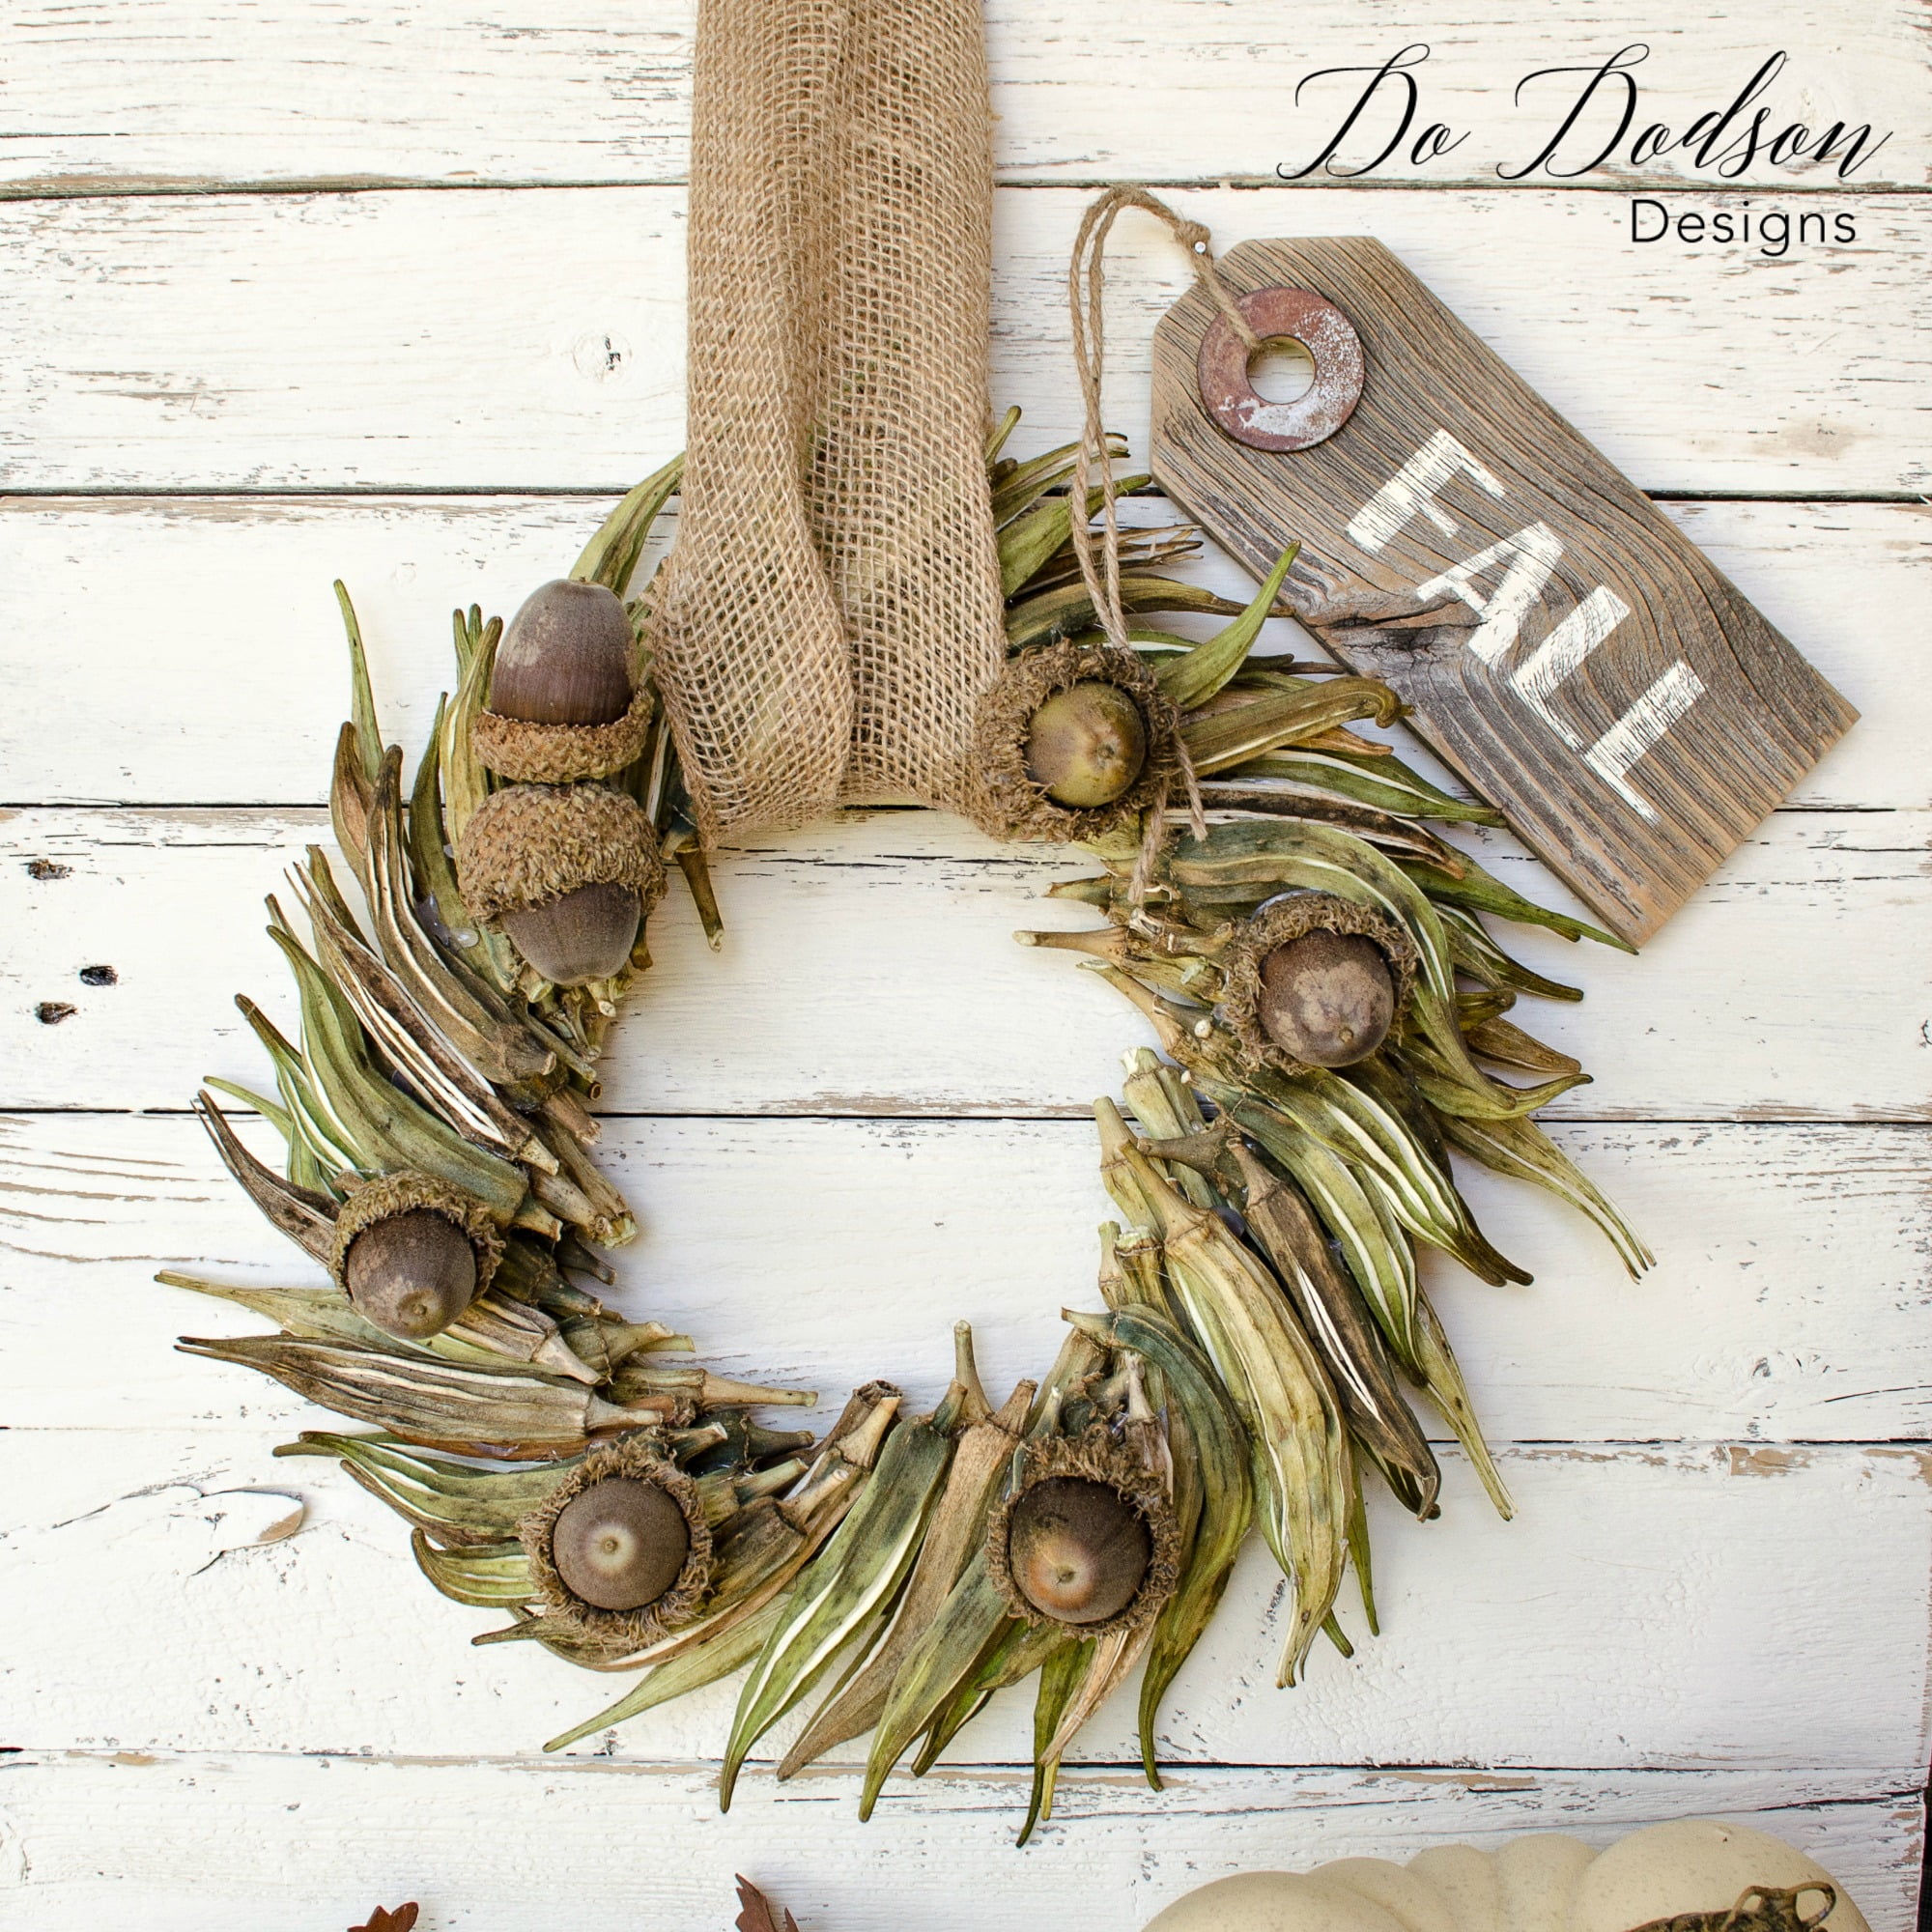 How To Make A Fall Wreath Made Out Of Dried Okra